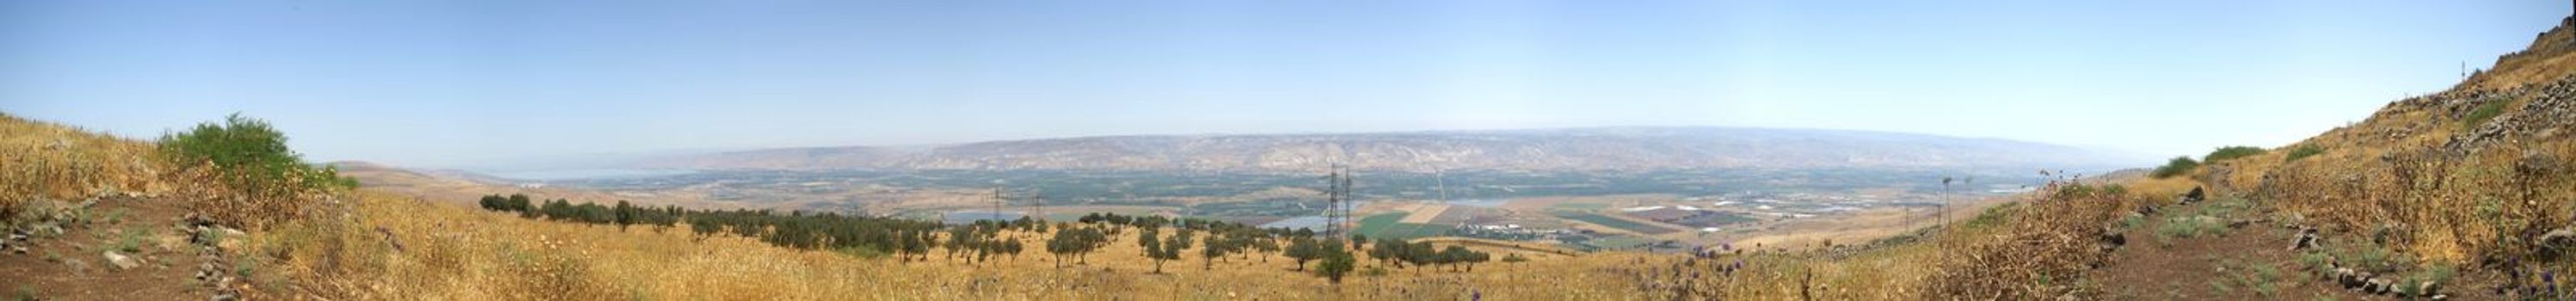 Mountains and nature in Galilee, Israel - travel vacation in  Middle East